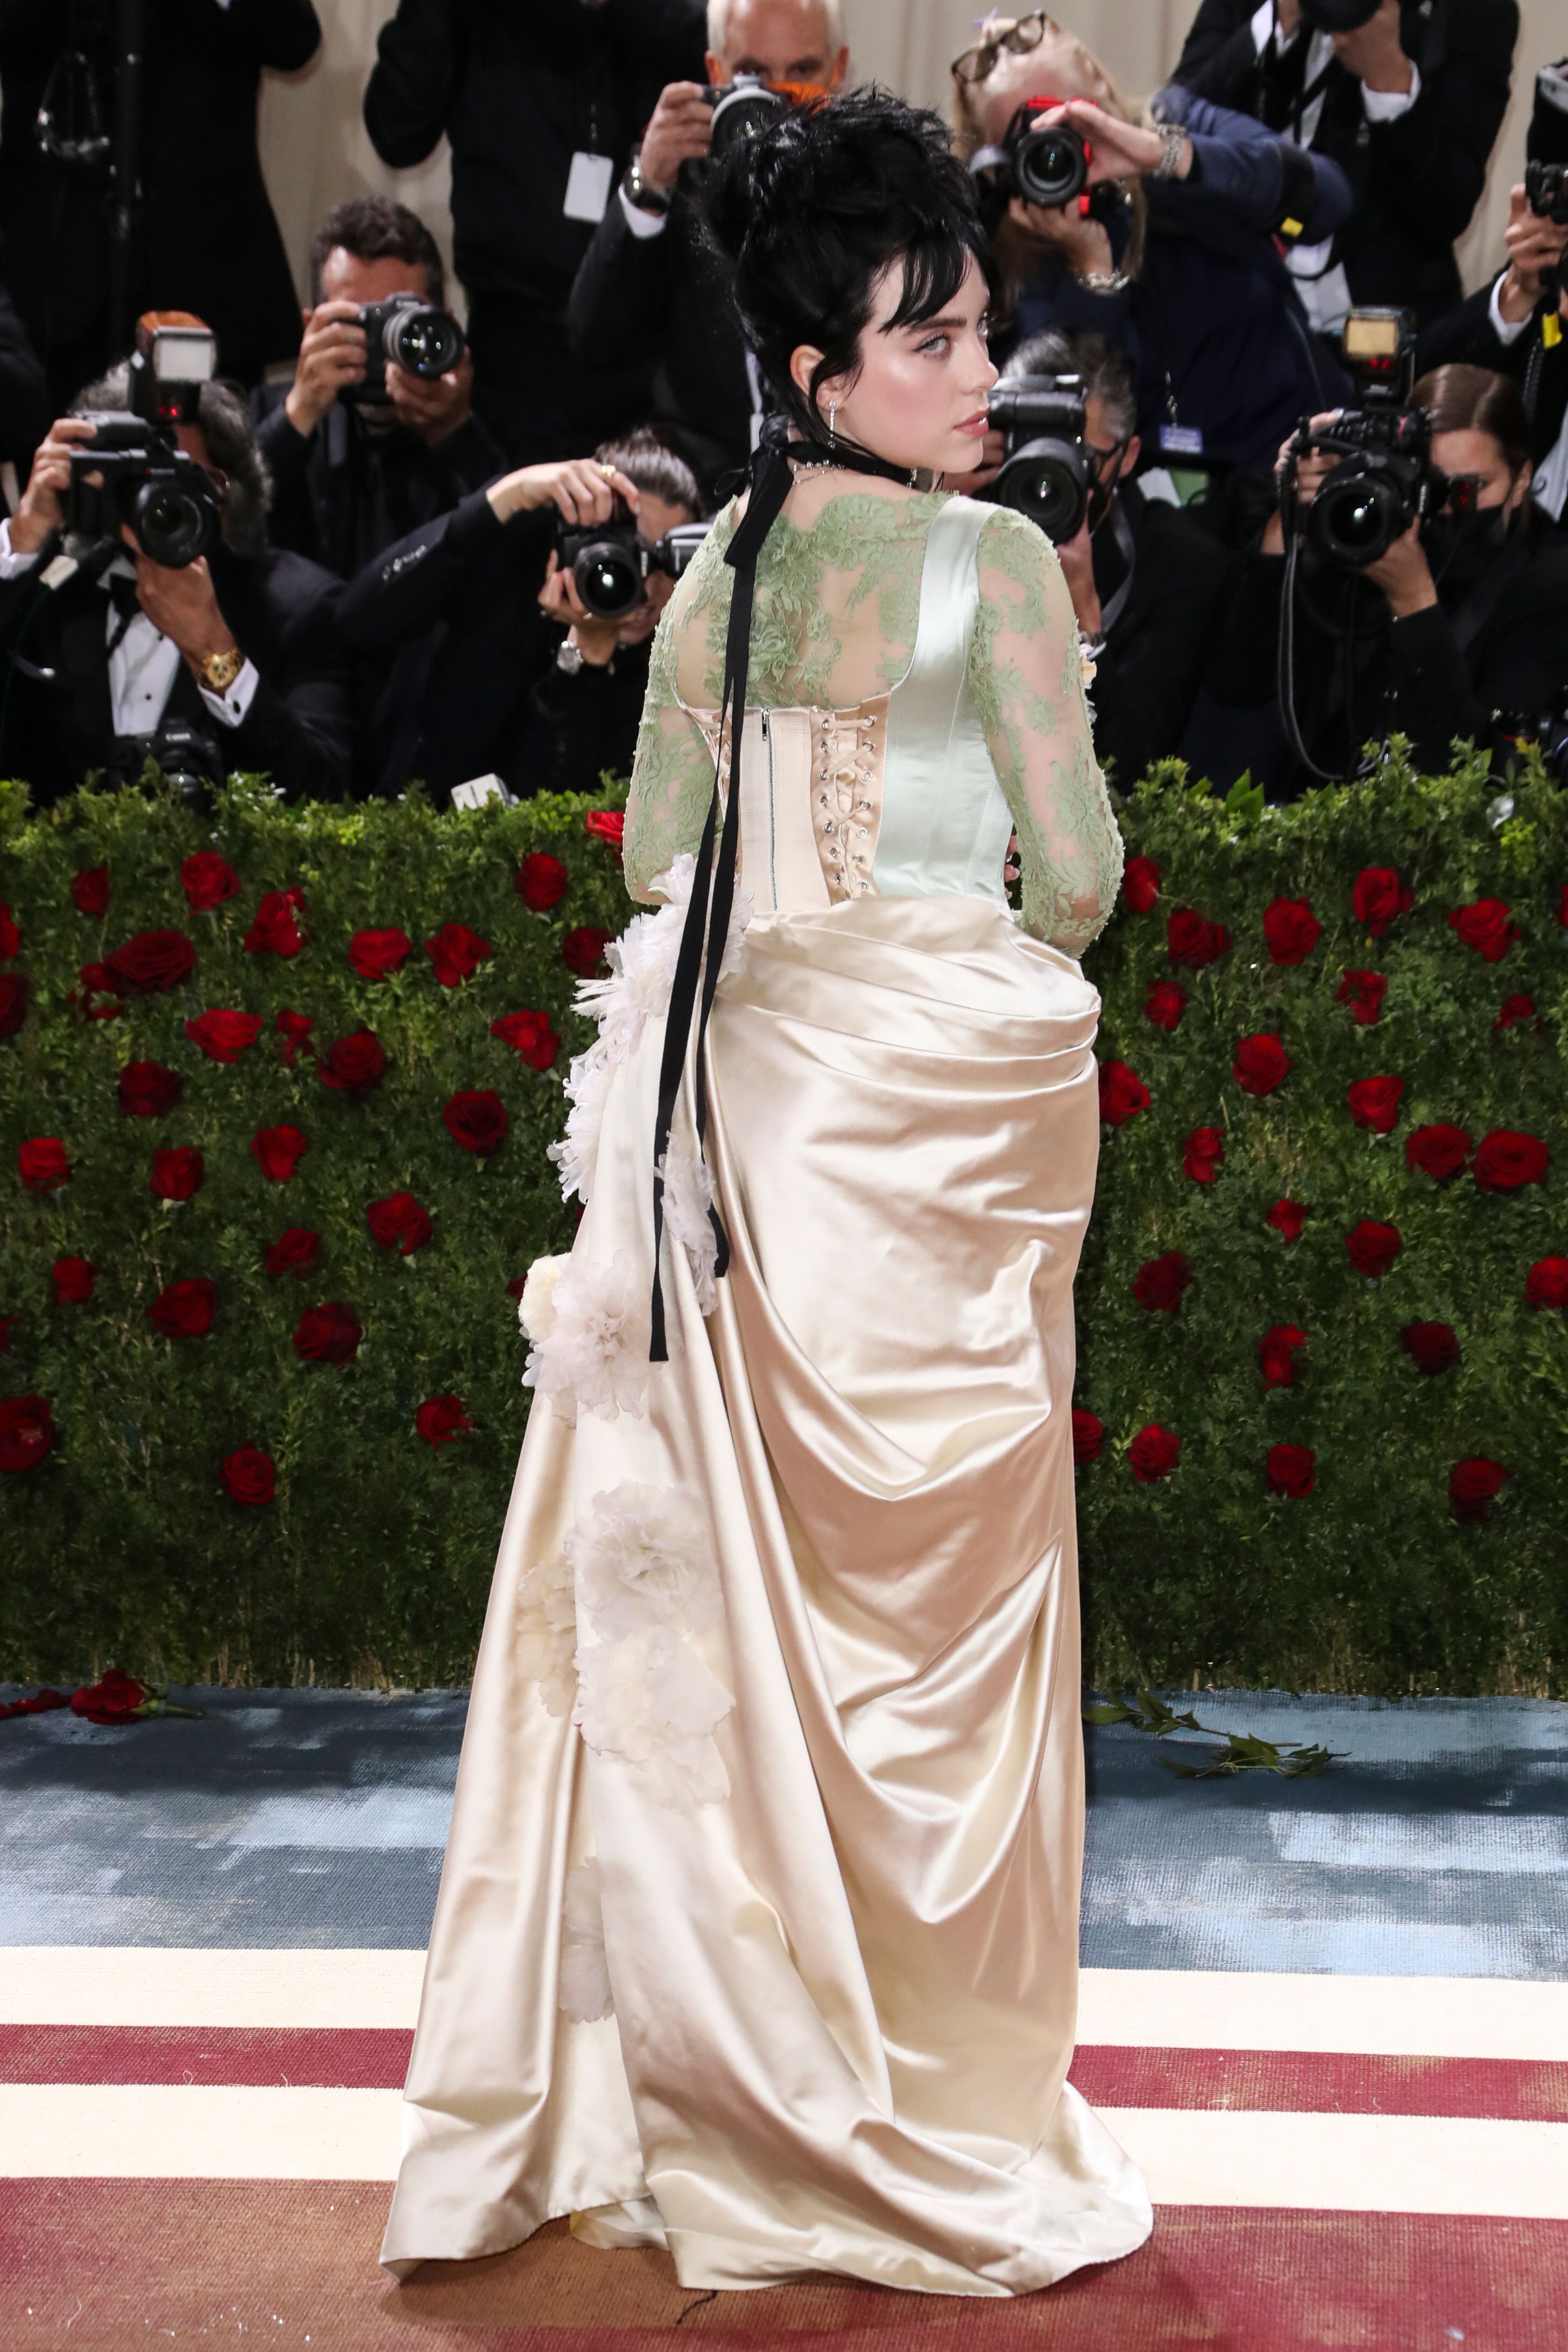 Billie Eilish's Met Gala 2022 Look Will Make You Happier Than Ever